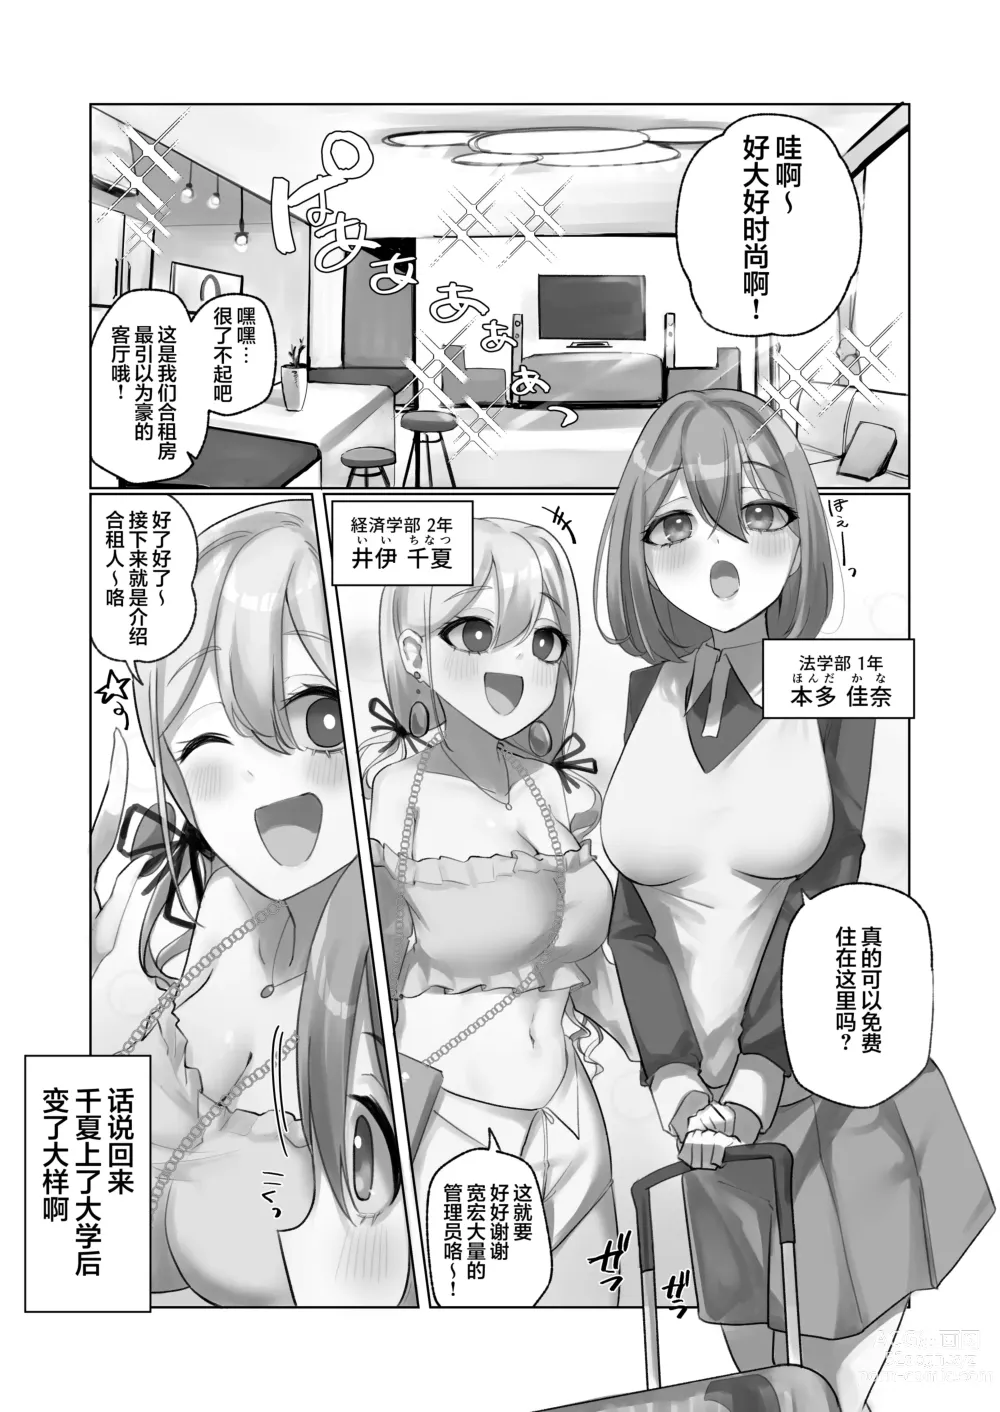 Page 2 of doujinshi Youkoso  Share House e